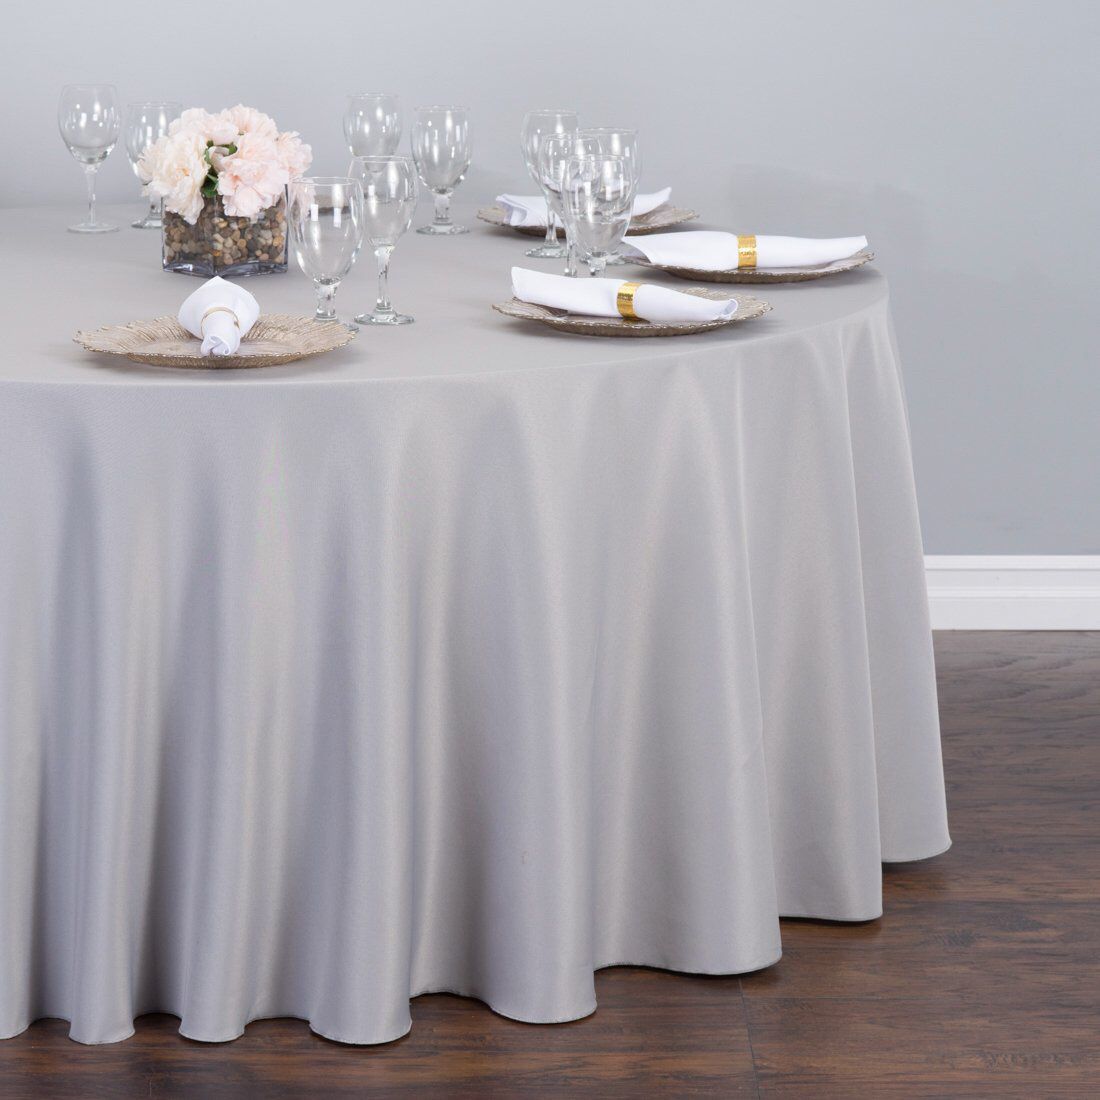 6 Round Silver Tablecloths 132”